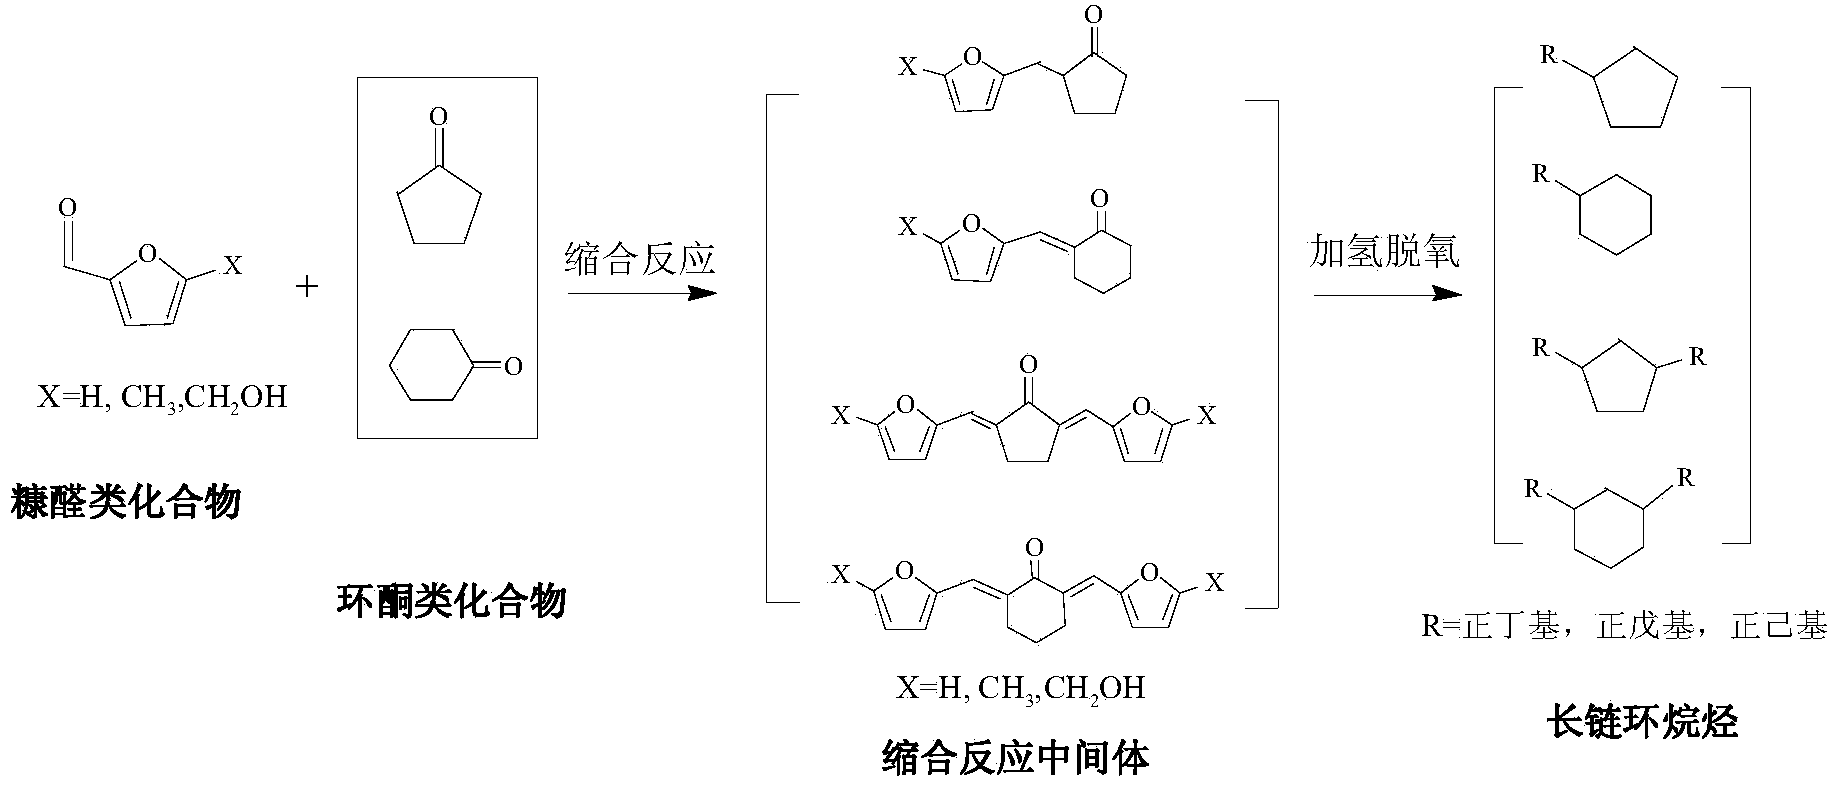 Method for preparing C10-C18 long chain naphthenic hydrocarbon by utilizing furfural compound